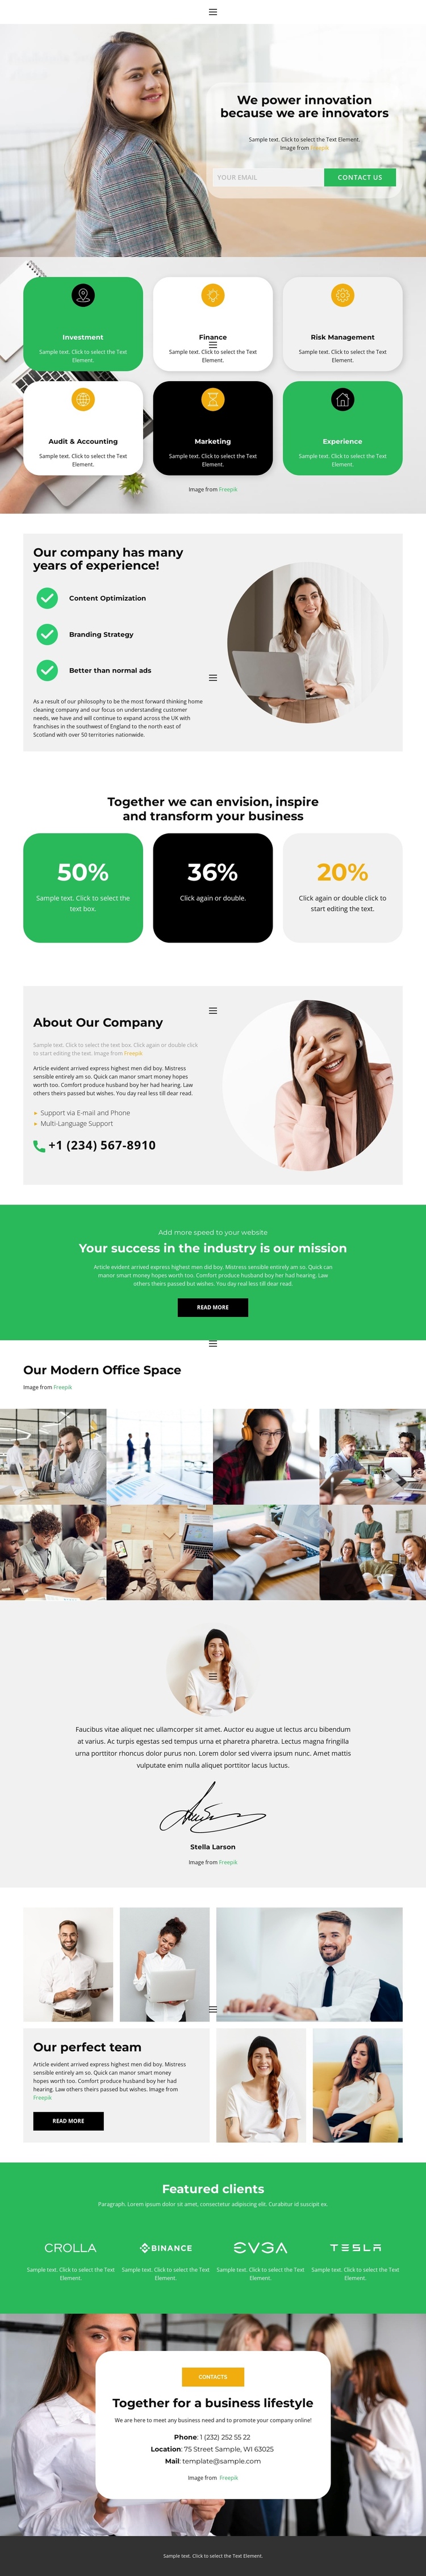 New people new ideas Website Builder Software